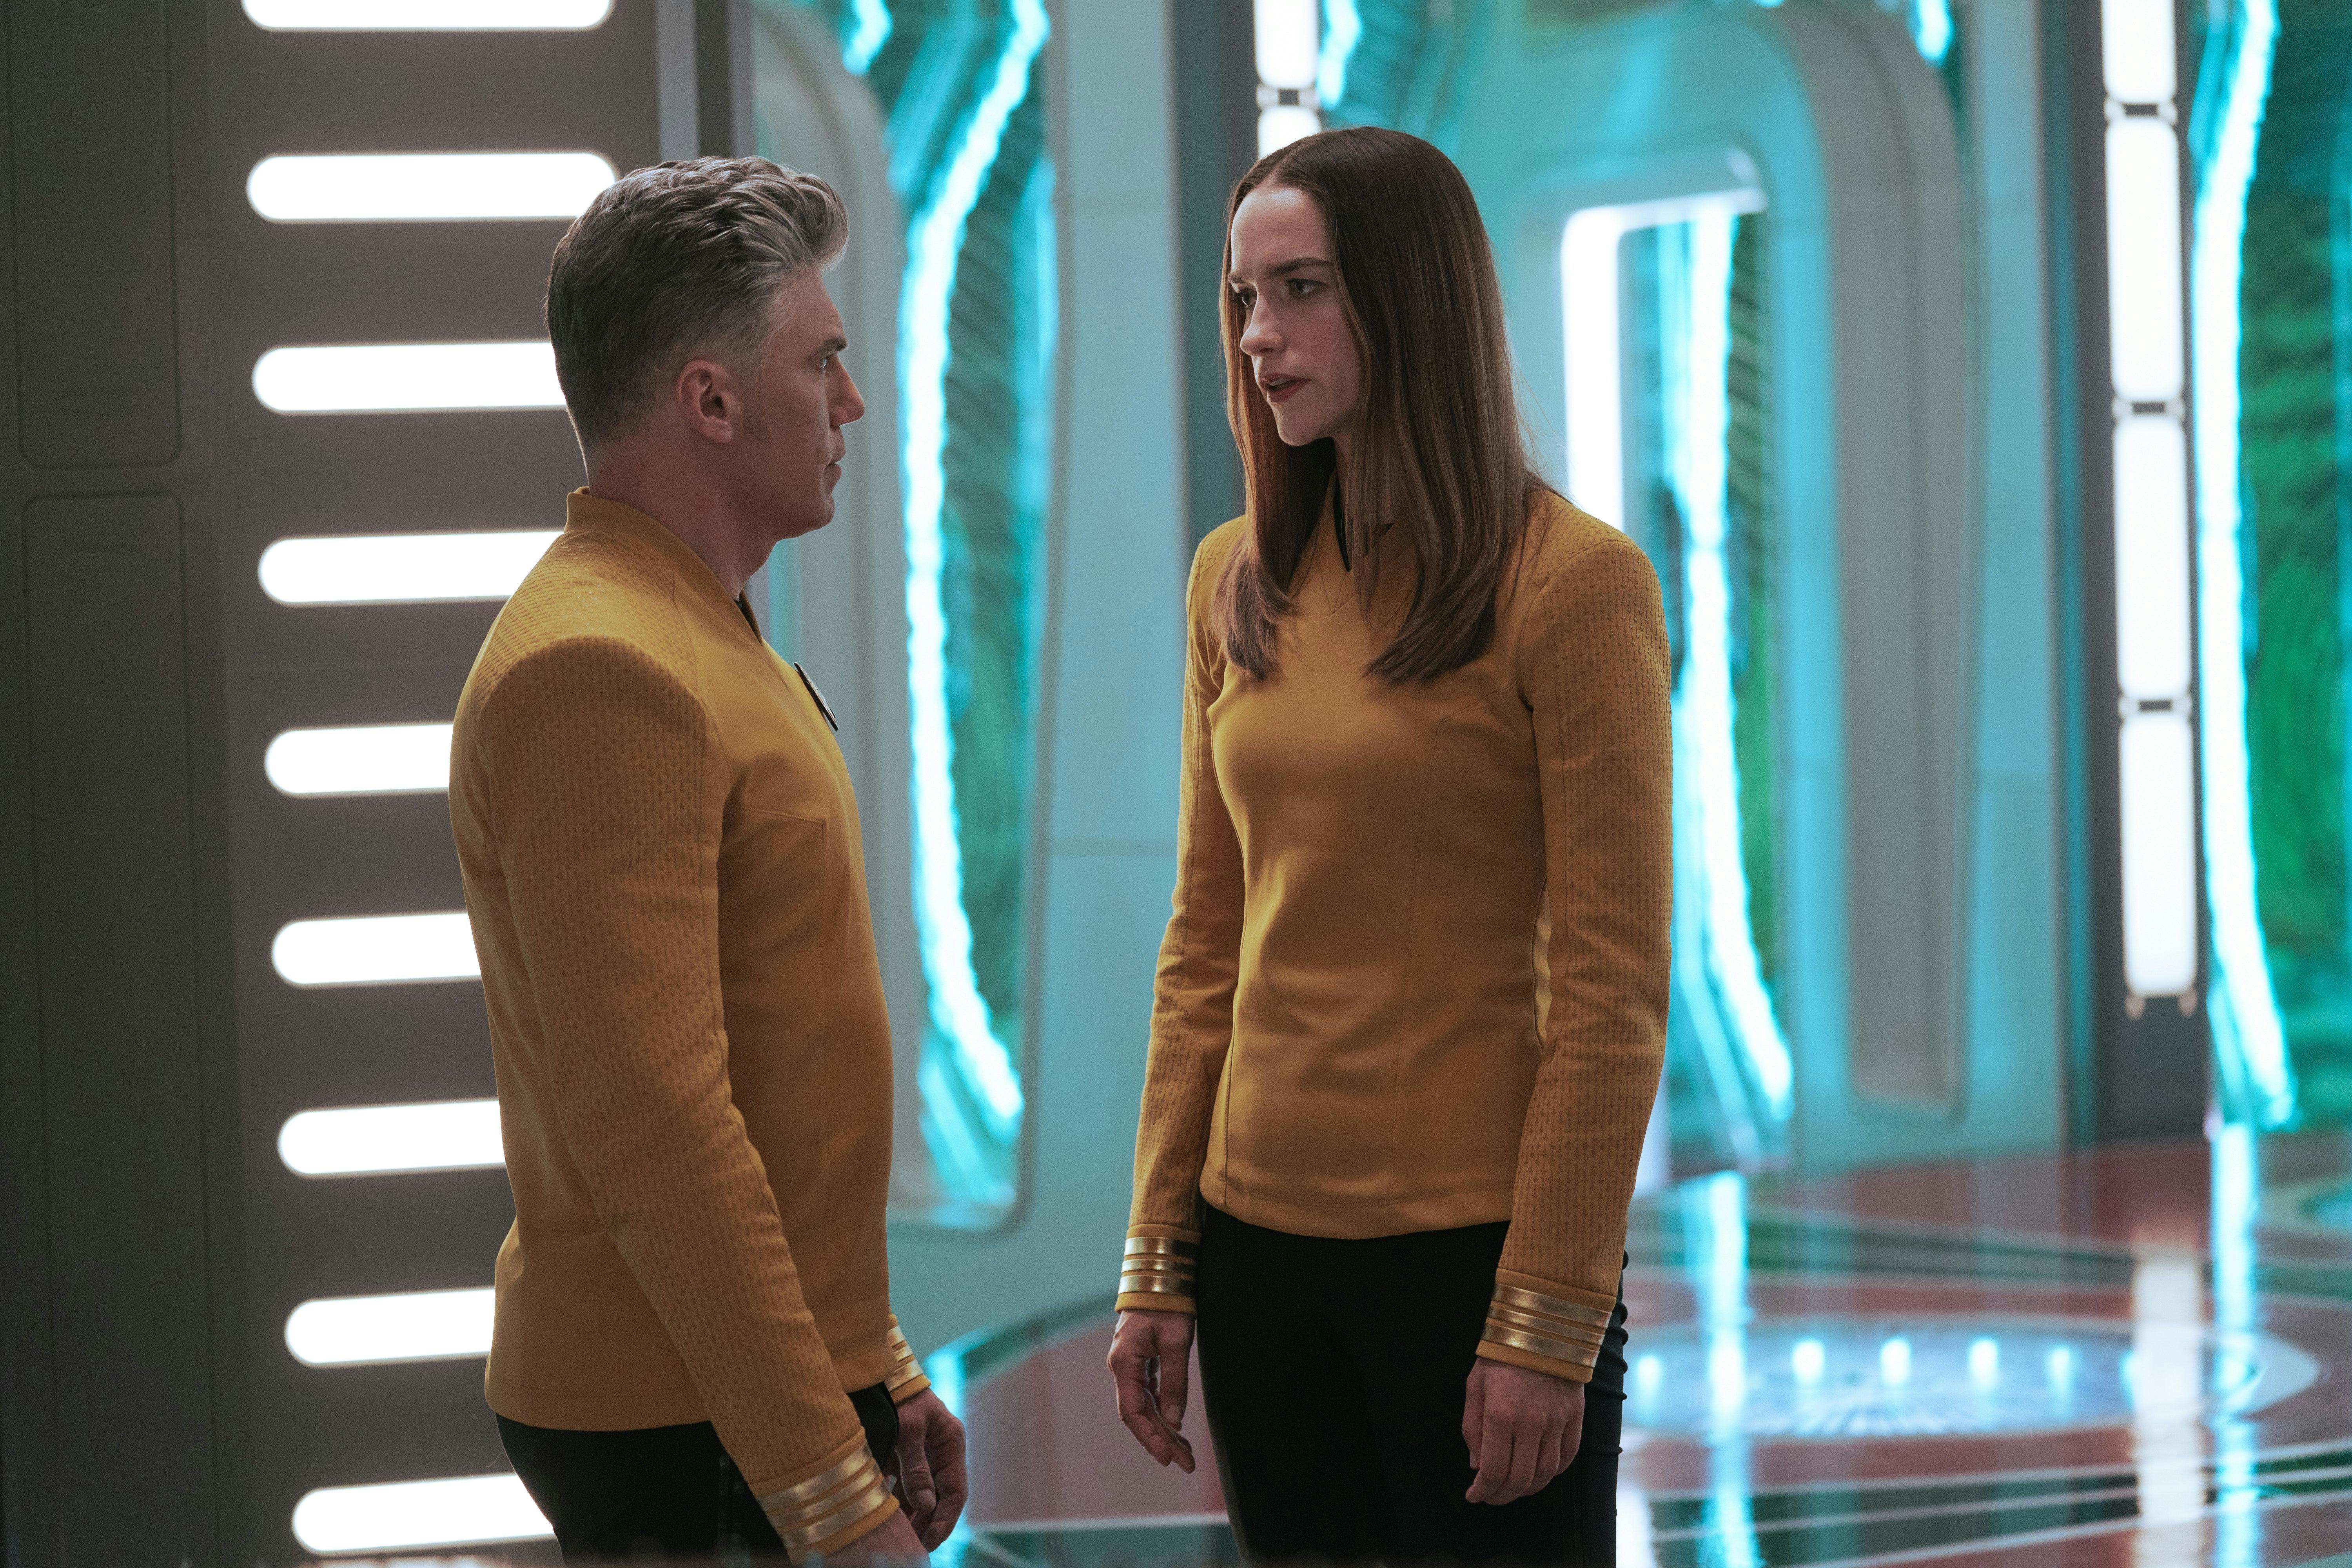 Captain Pike (Anson Mount) has a serious conversation with Captain Batel in the transporter room.